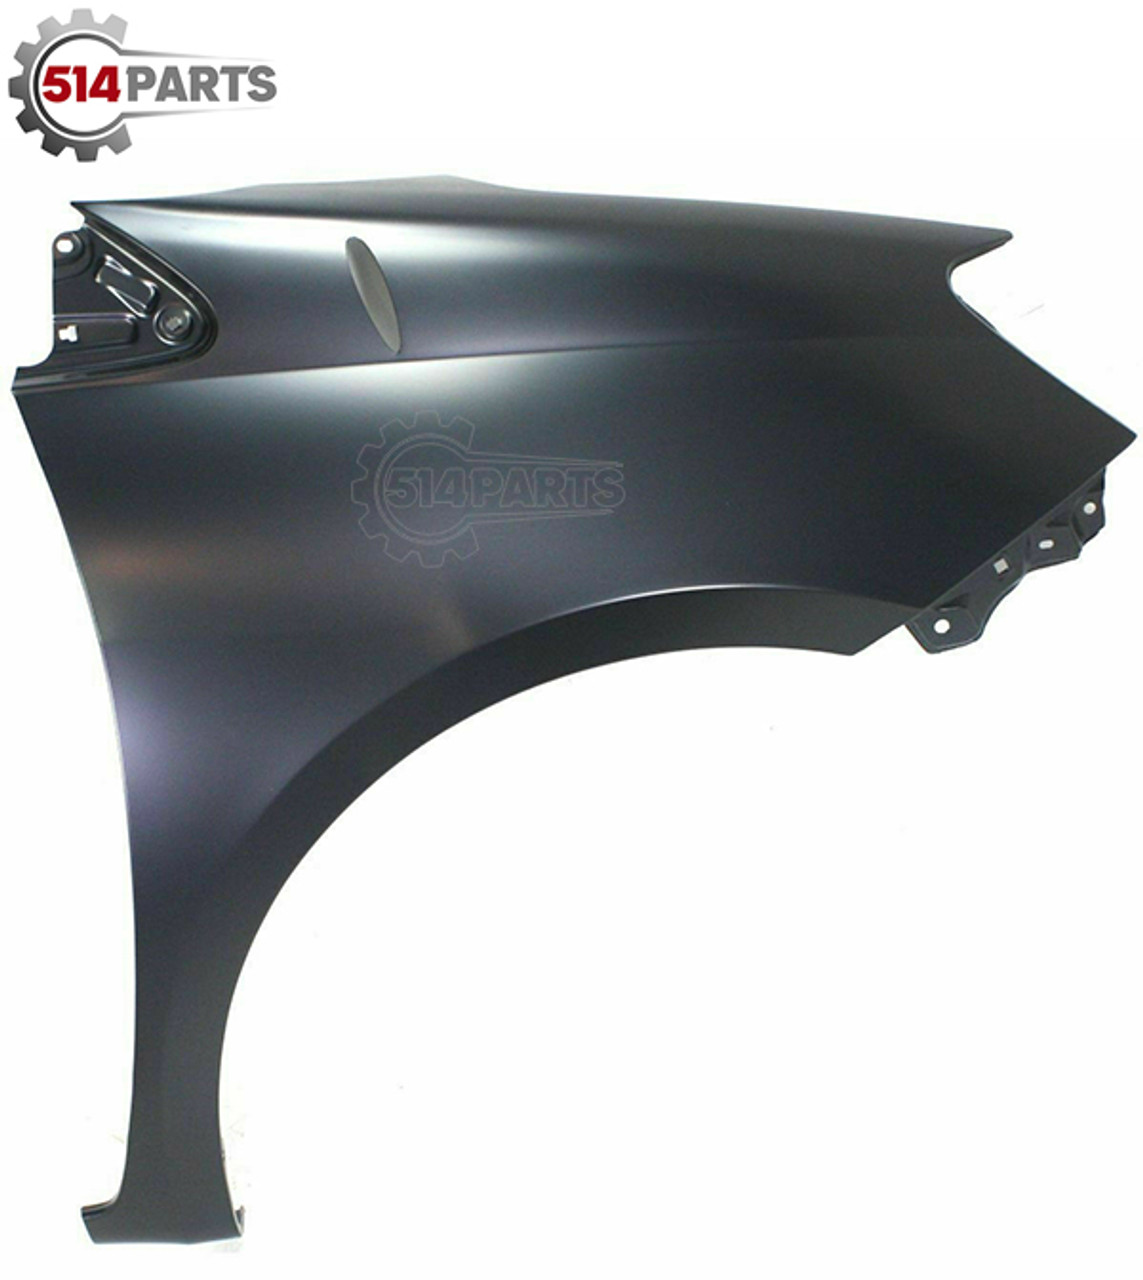 2004 - 2010 TOYOTA SIENNA FRONT RIGHT FENDER with ANTENNA HOLE - AILE AVANT DROITE avec TROU D'ANTENNE